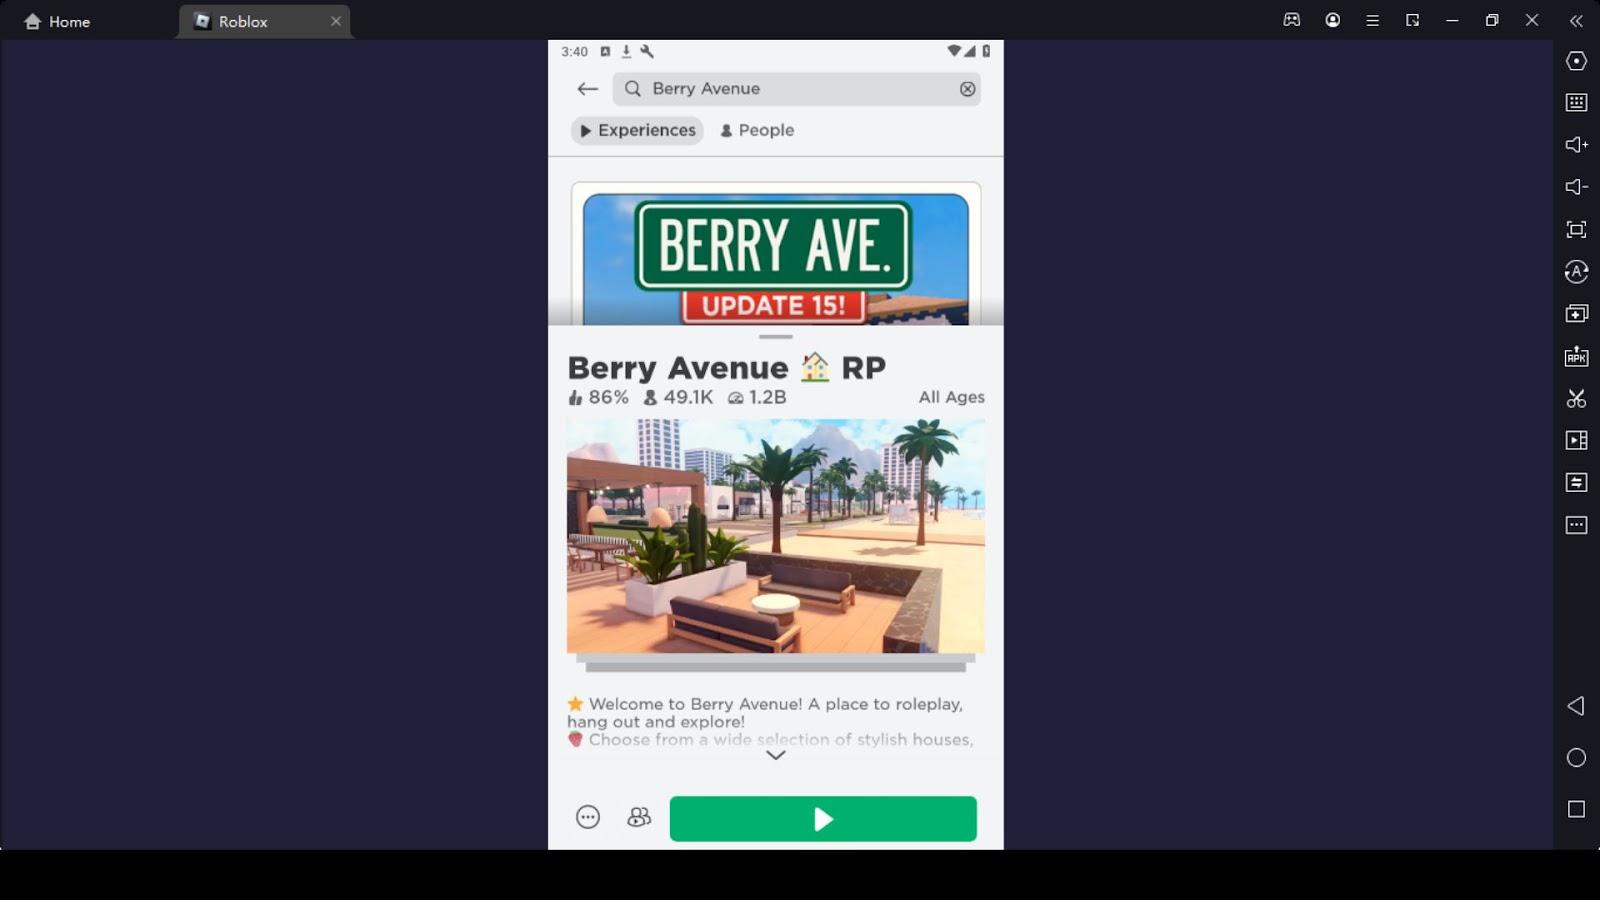 How Can I Play Berry Avenue Rp on My PC